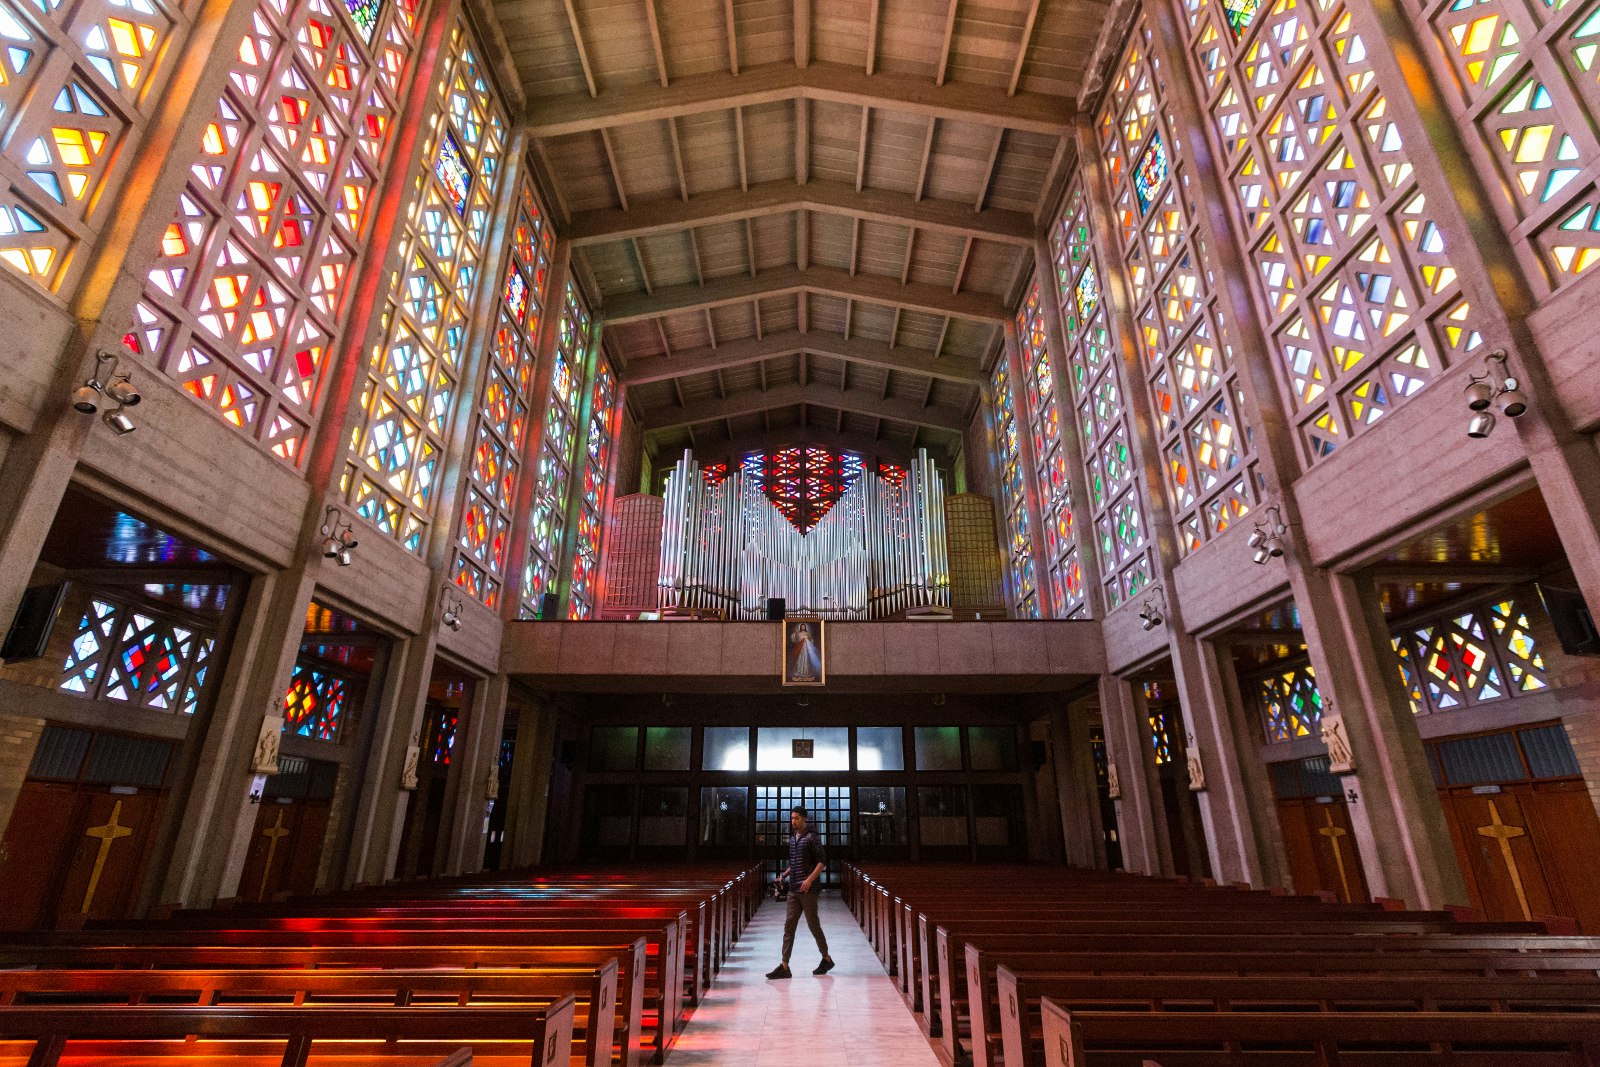 Looking down the long aisle of the Cathedral of Christ the King in Hillbrow. The towering vertical walls to the left and right are brilliantly lit stained glass windows, above is a modern vaulted ceiling. © Heather Mason / Lonely Planet